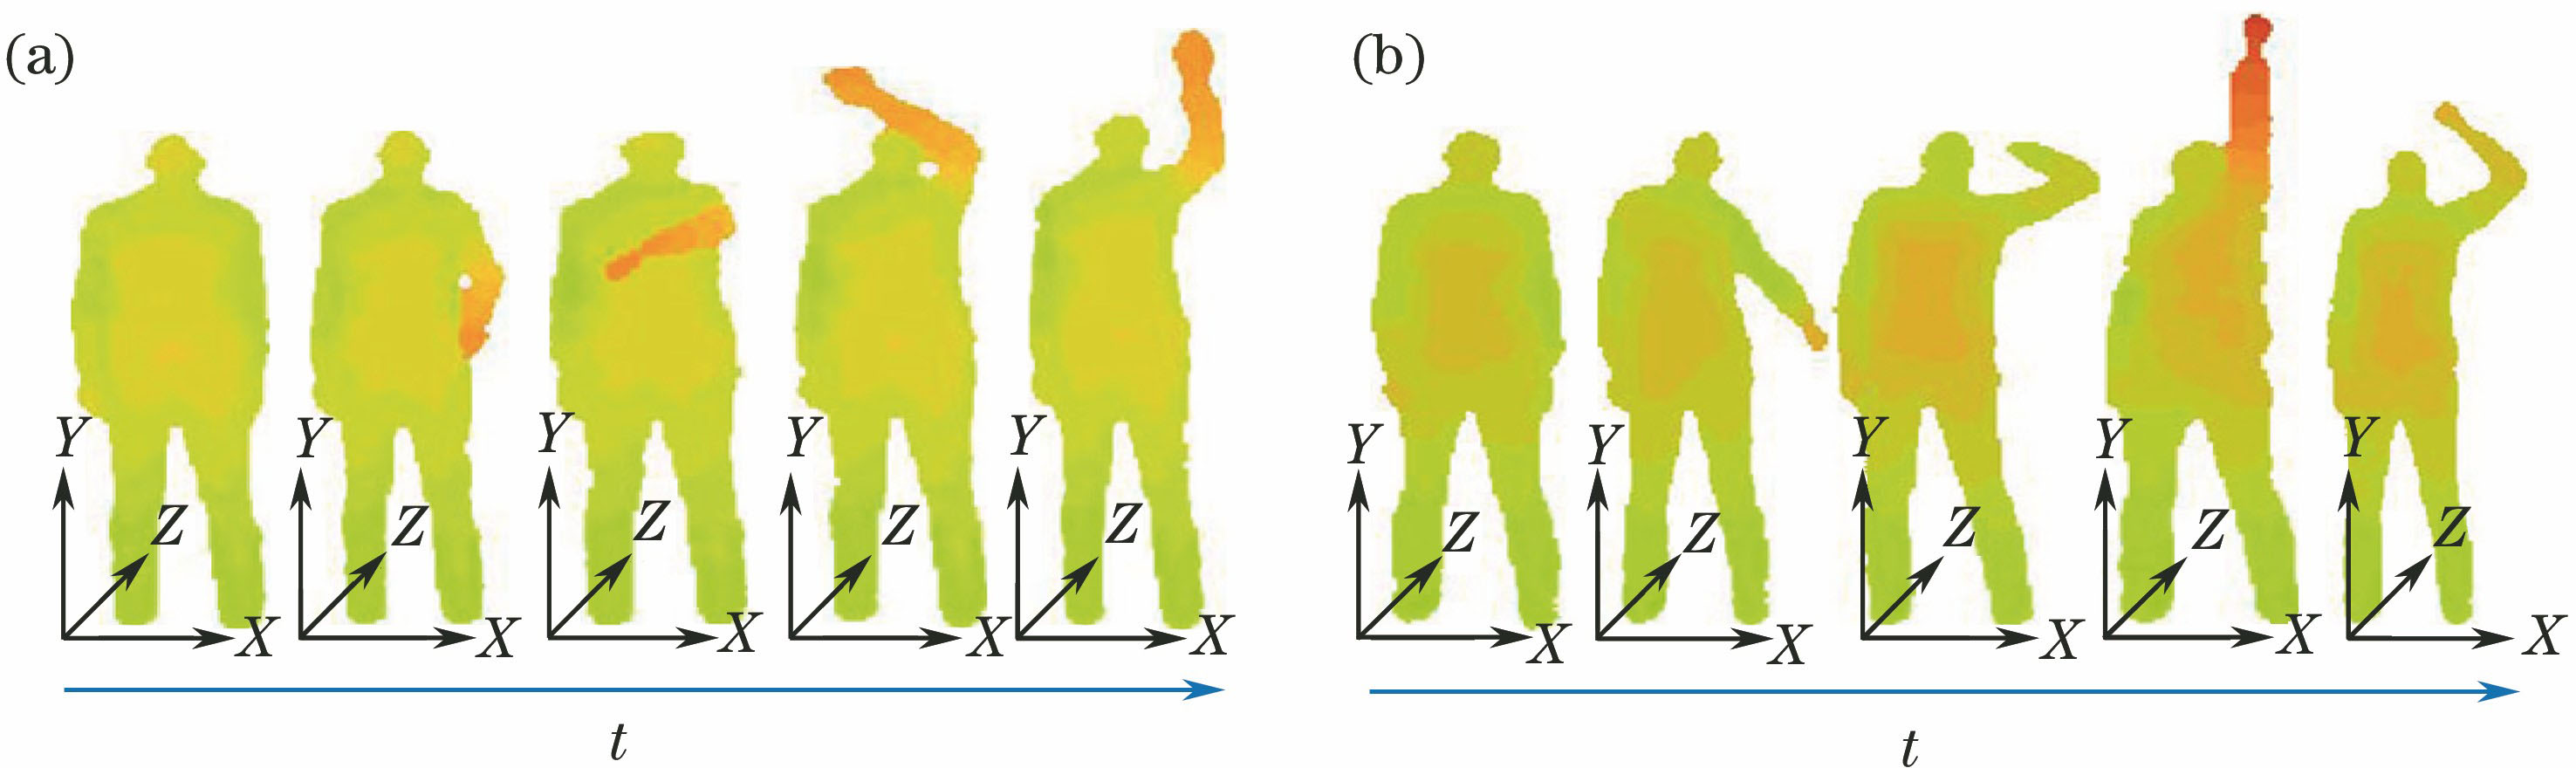 Action sequences of 3D point clouds of (a) high throw and (b) draw circle